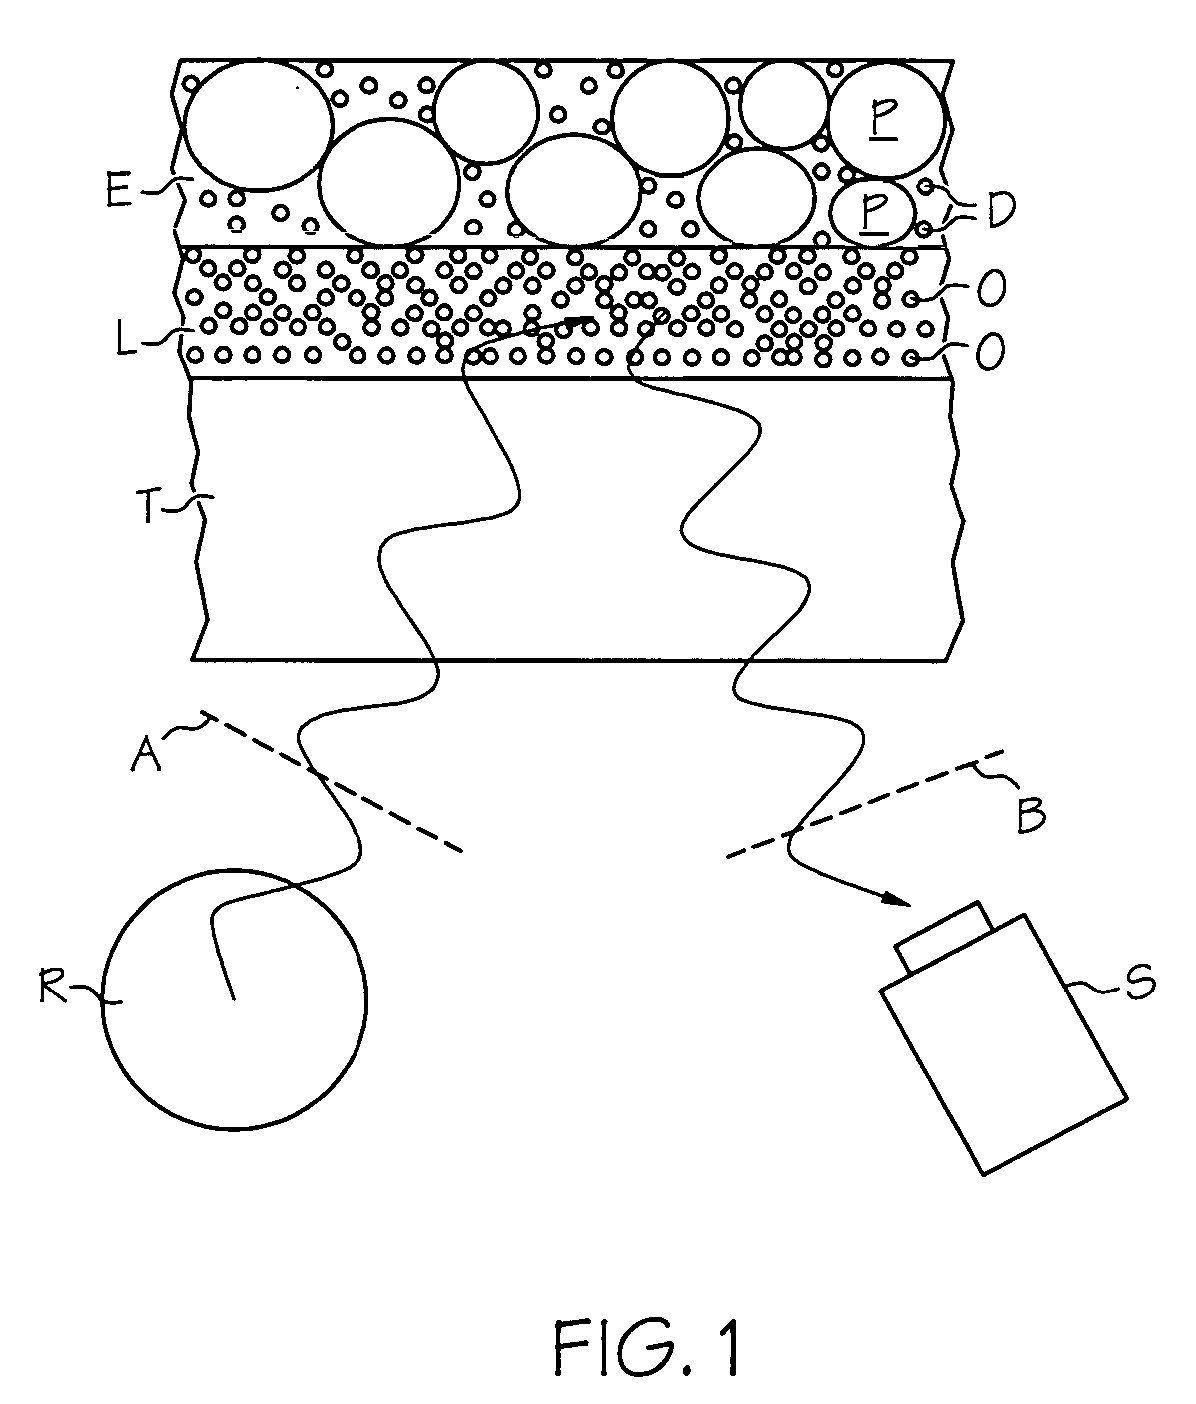 Diffusion layer for an enzyme-based sensor application